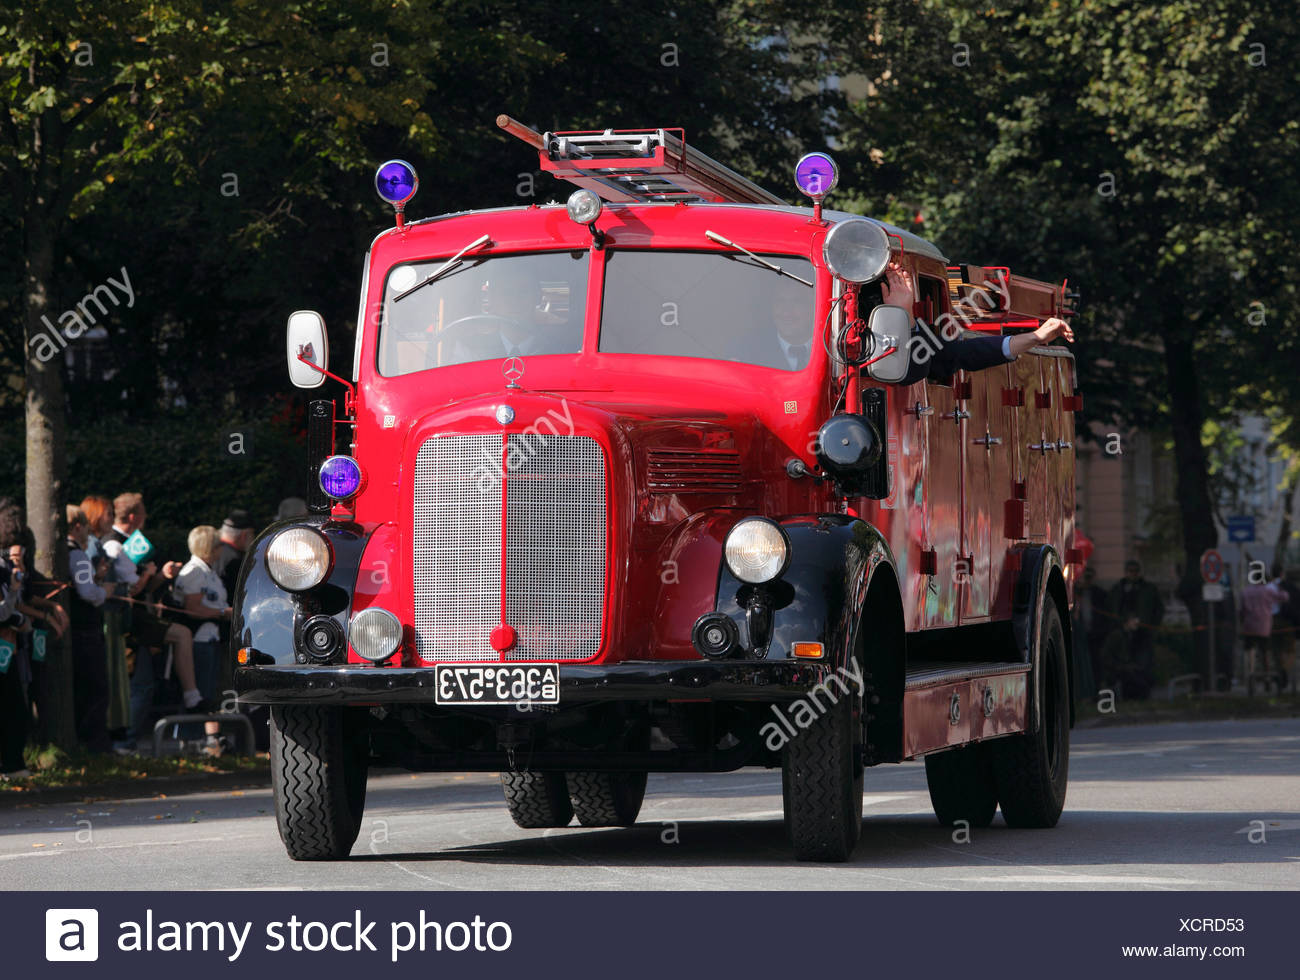 Old Fire Engine High Resolution Stock Photography and 